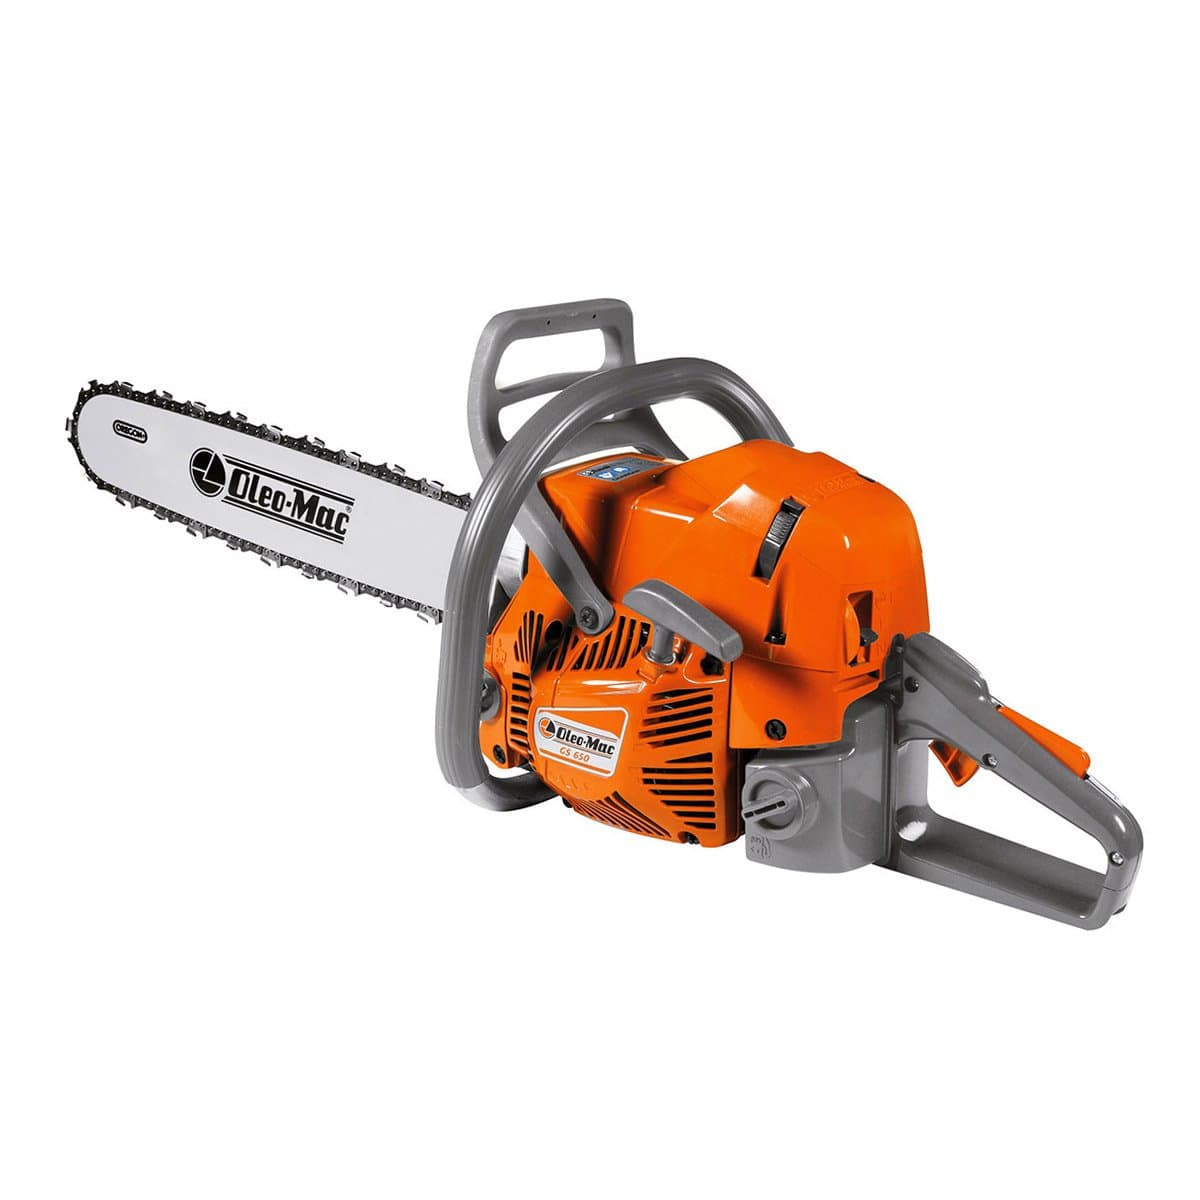 Oleo-Mac 4.7 HP Professional Chainsaw - GS 650 | Supply Master | Accra, Ghana Tools Building Steel Engineering Hardware tool